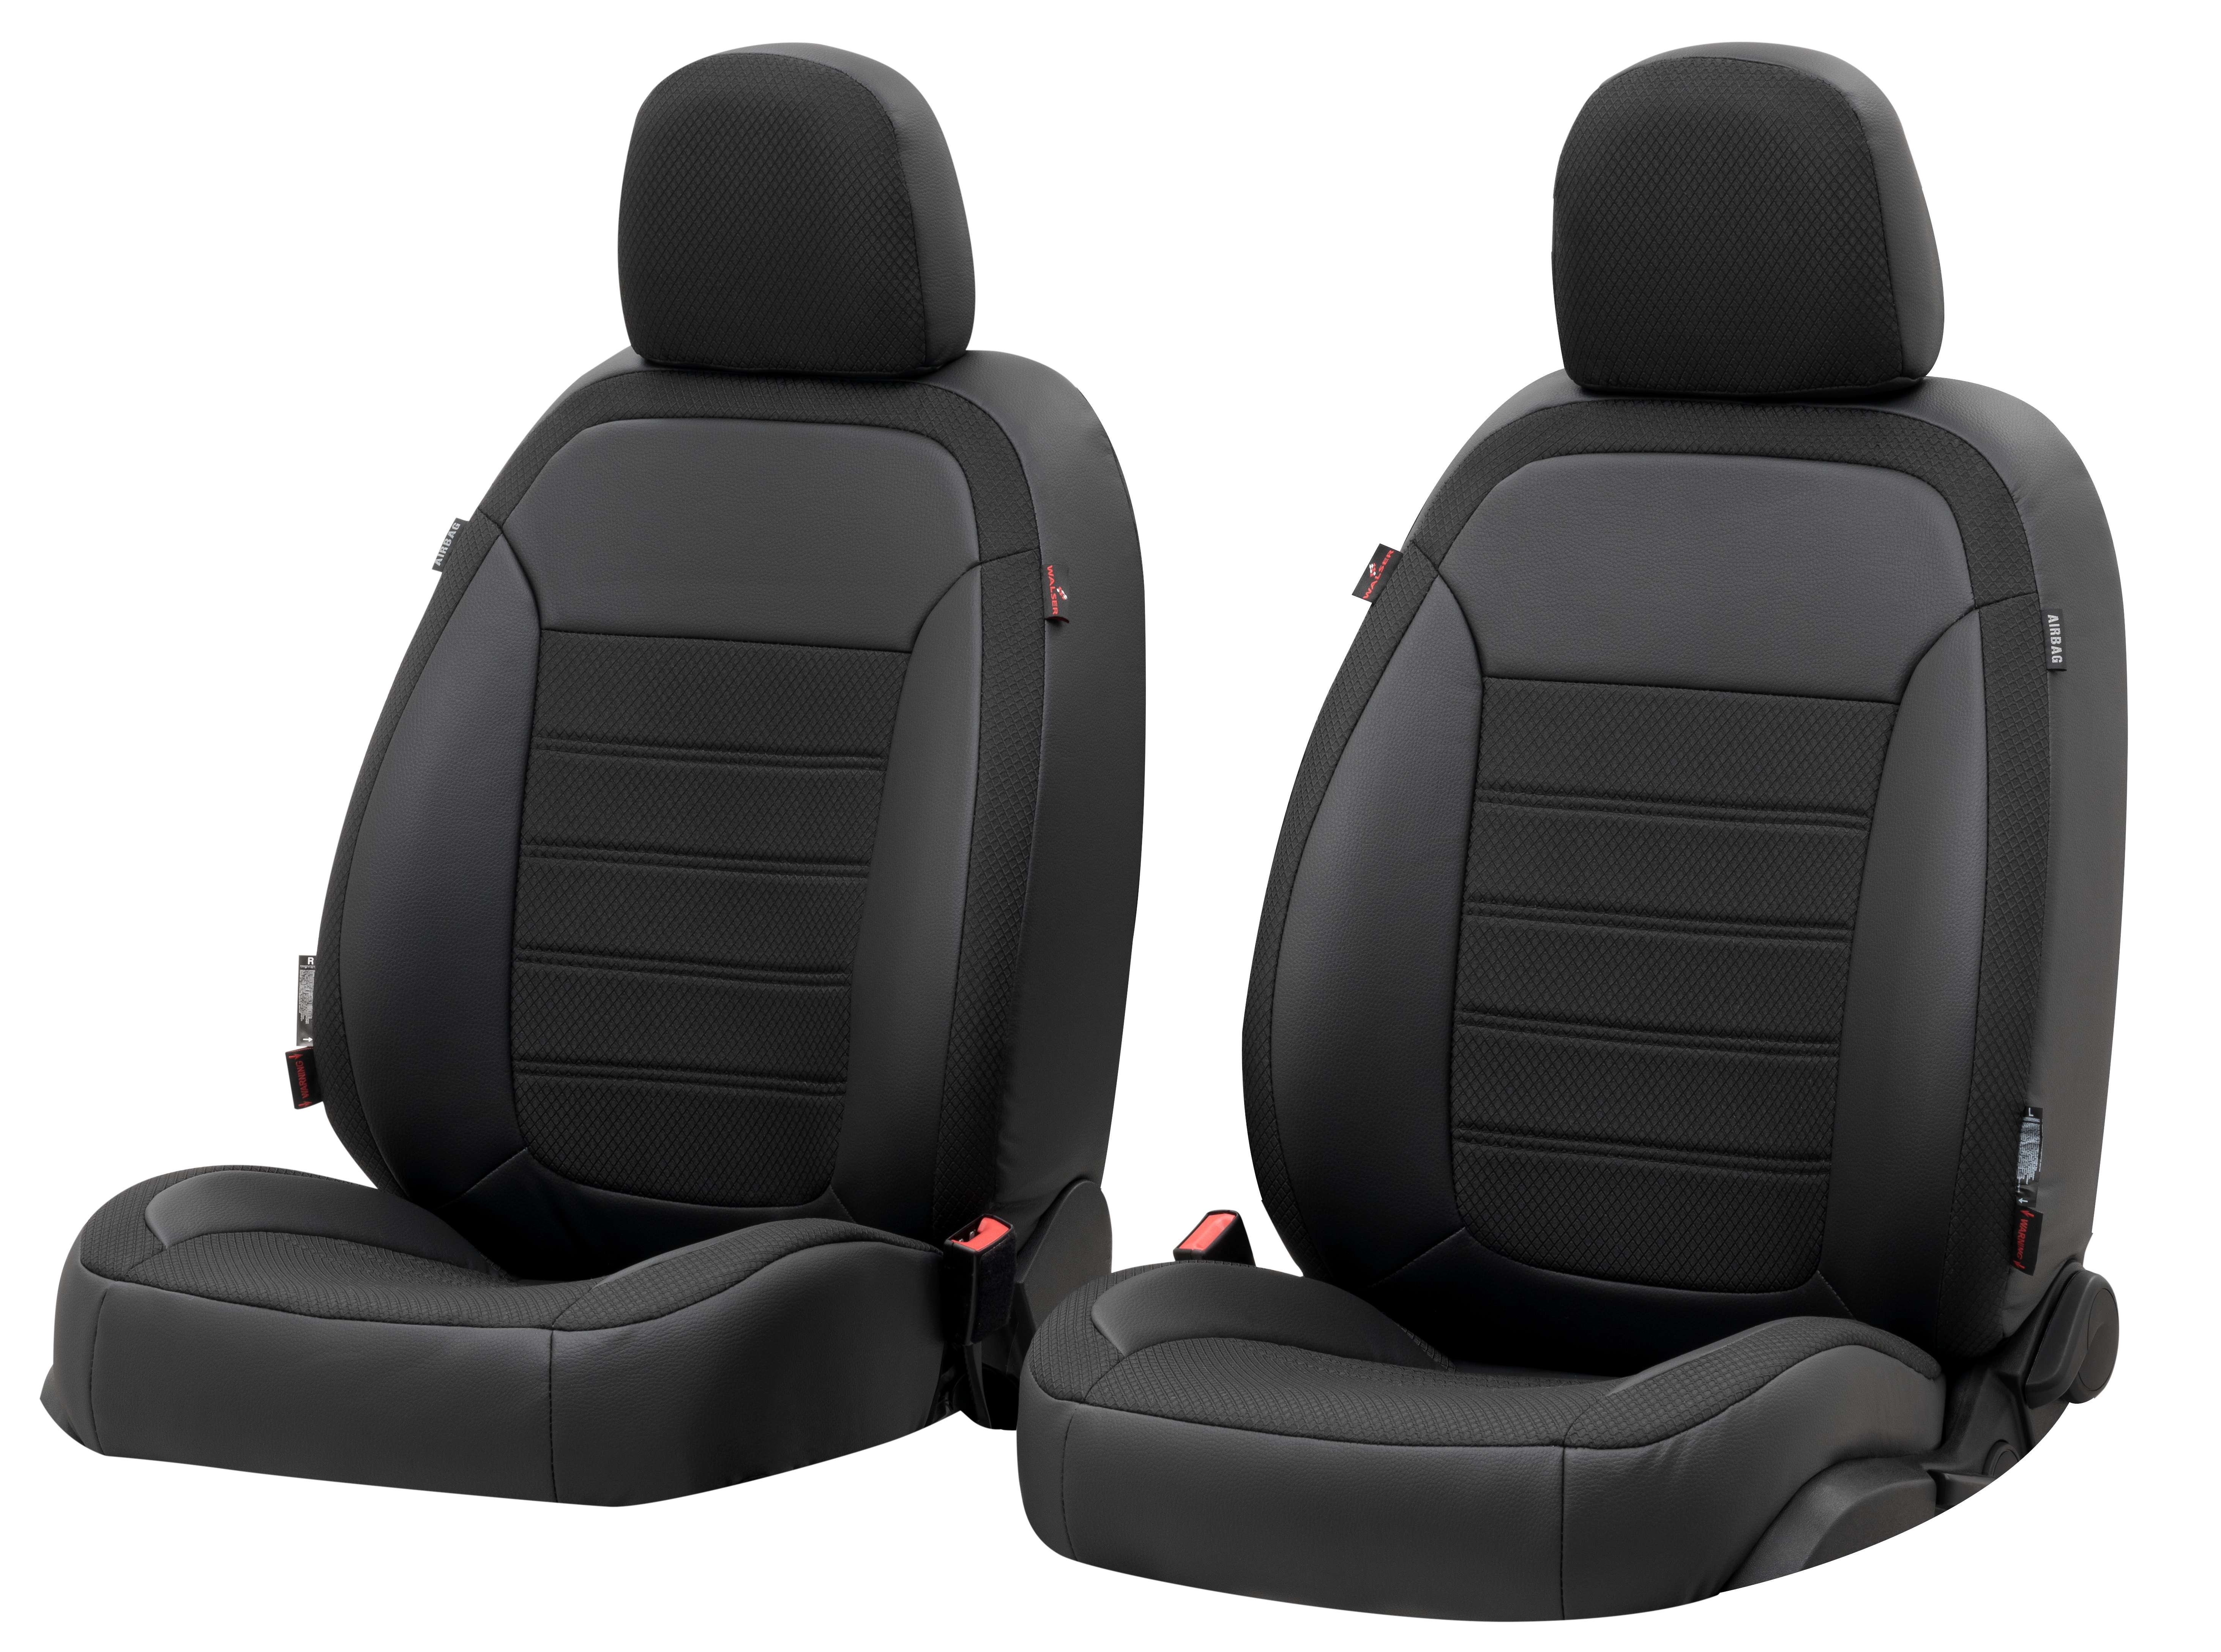 Seat Cover Aversa for Opel Astra J (P10) 09/2009-10/2015, 2 seat covers for sport seats